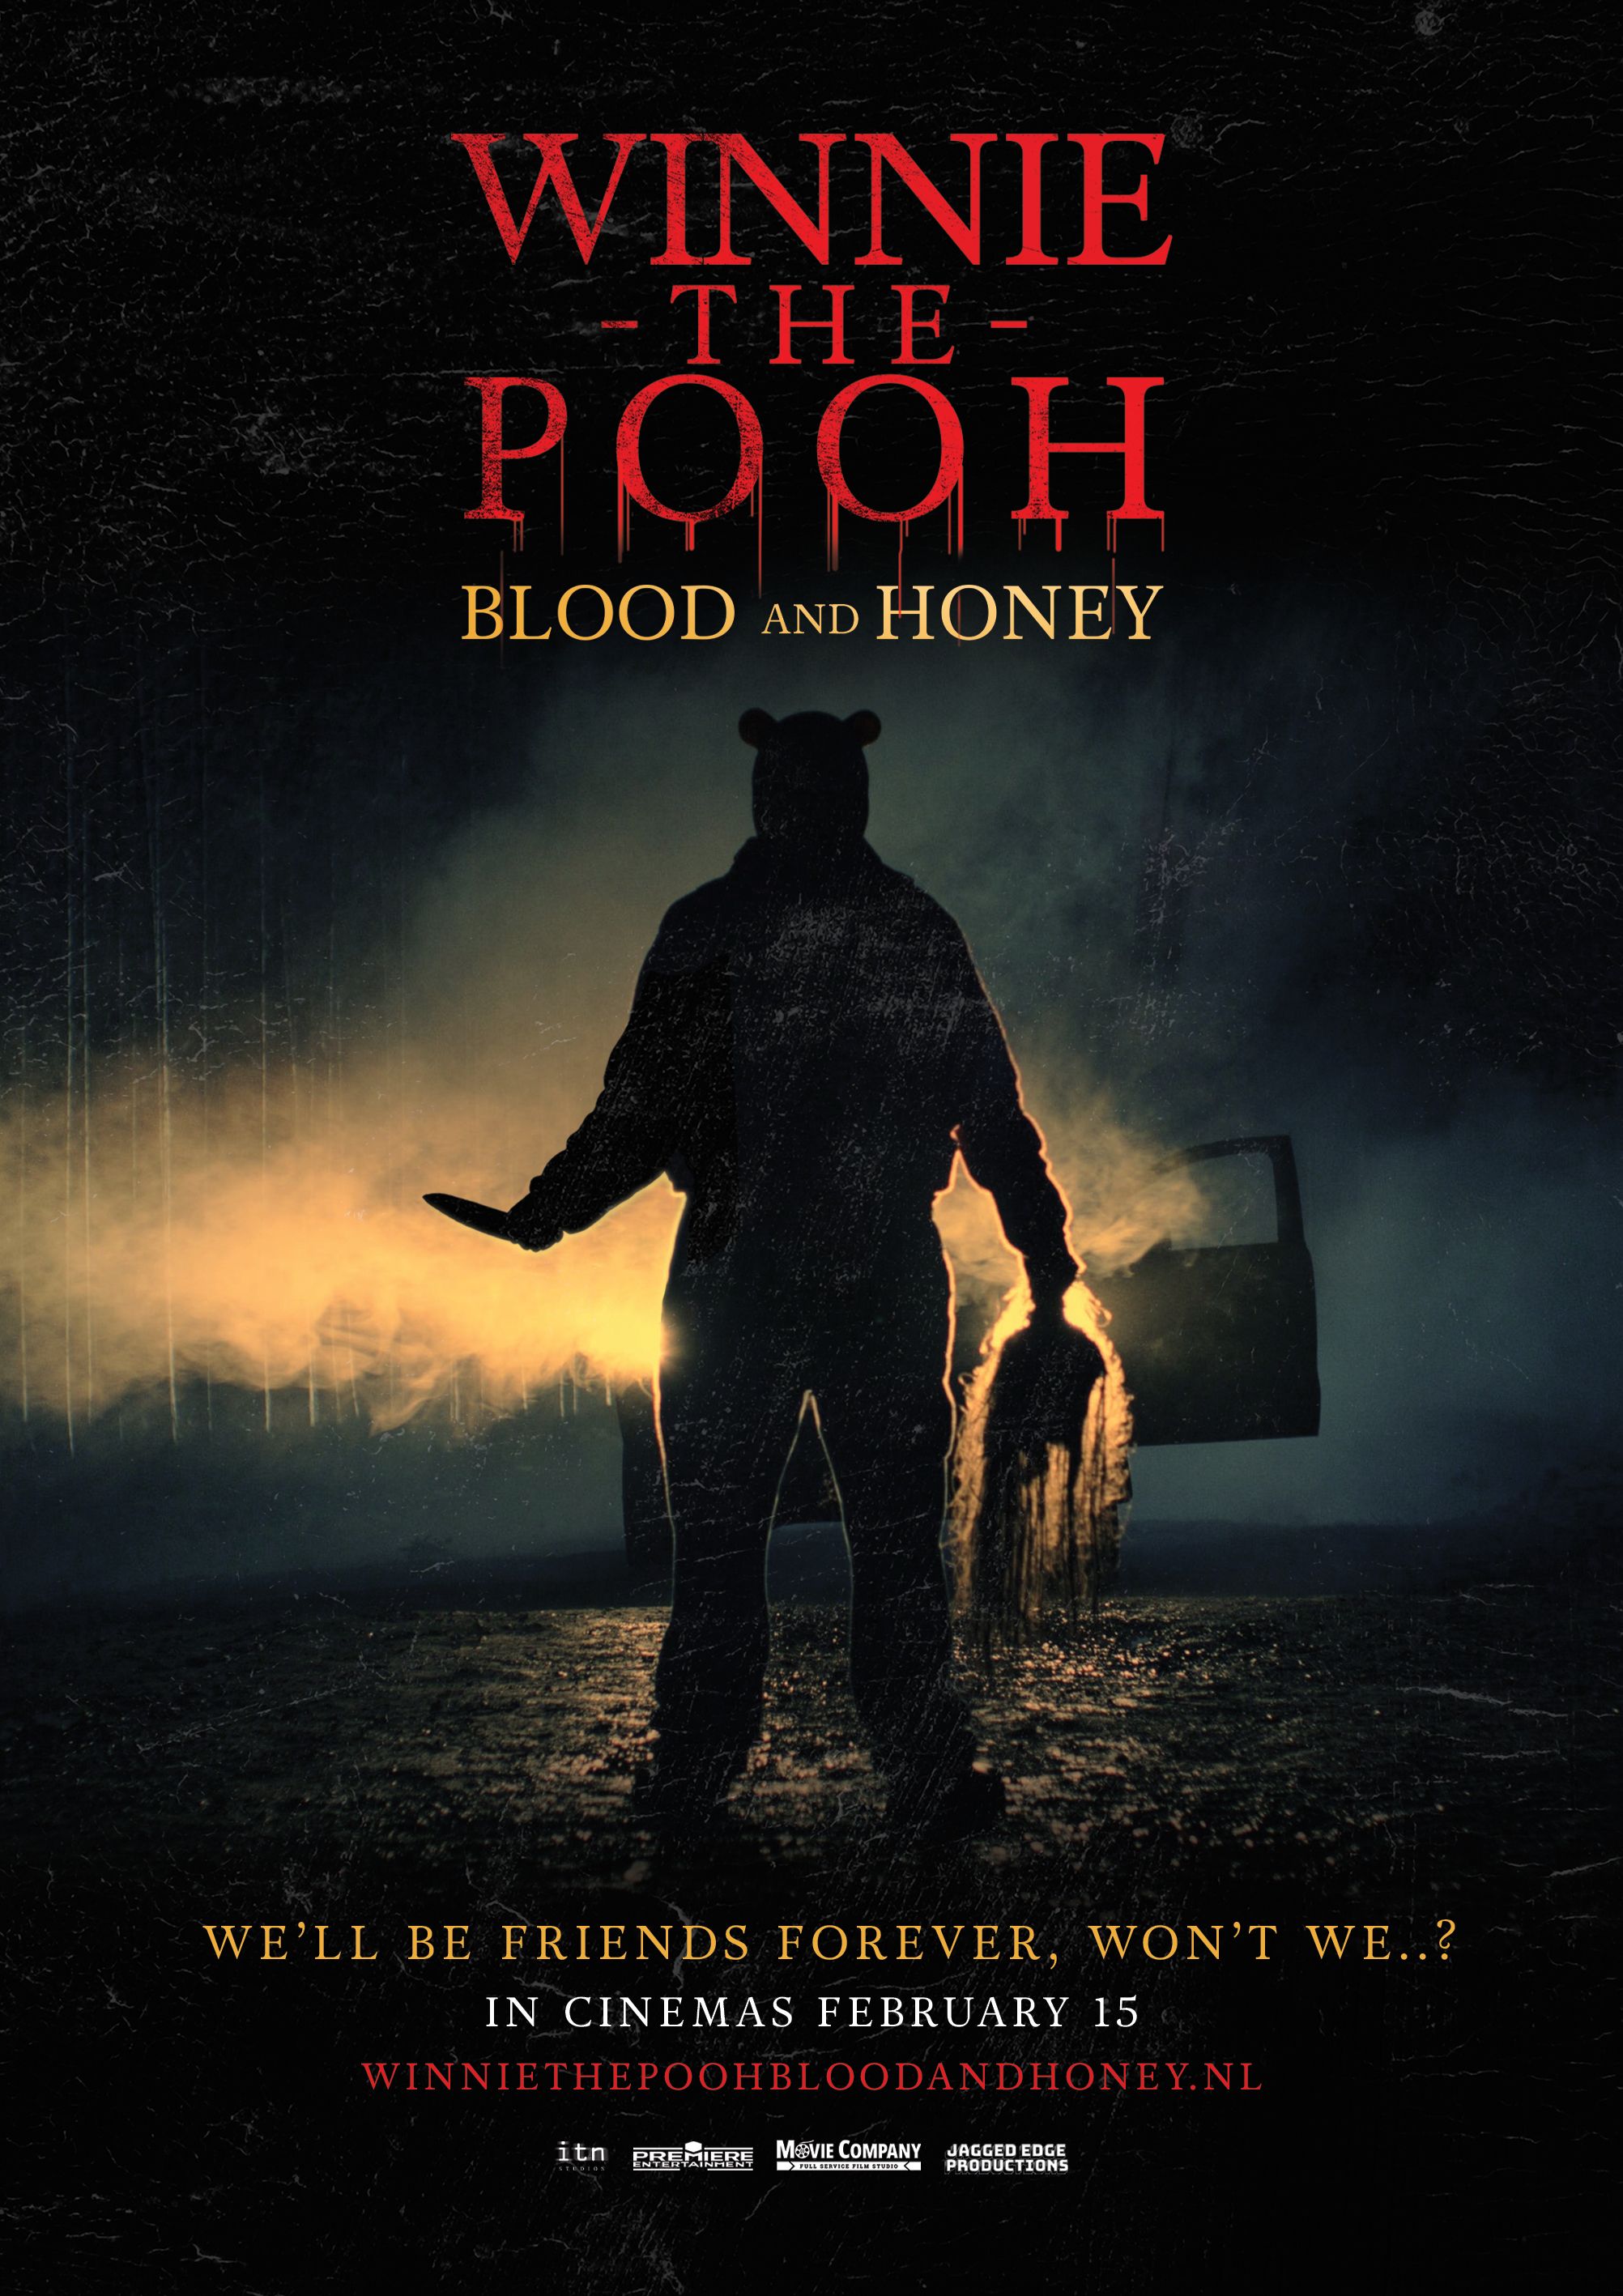 Winnie the Pooh Blood and Honey Film Poster